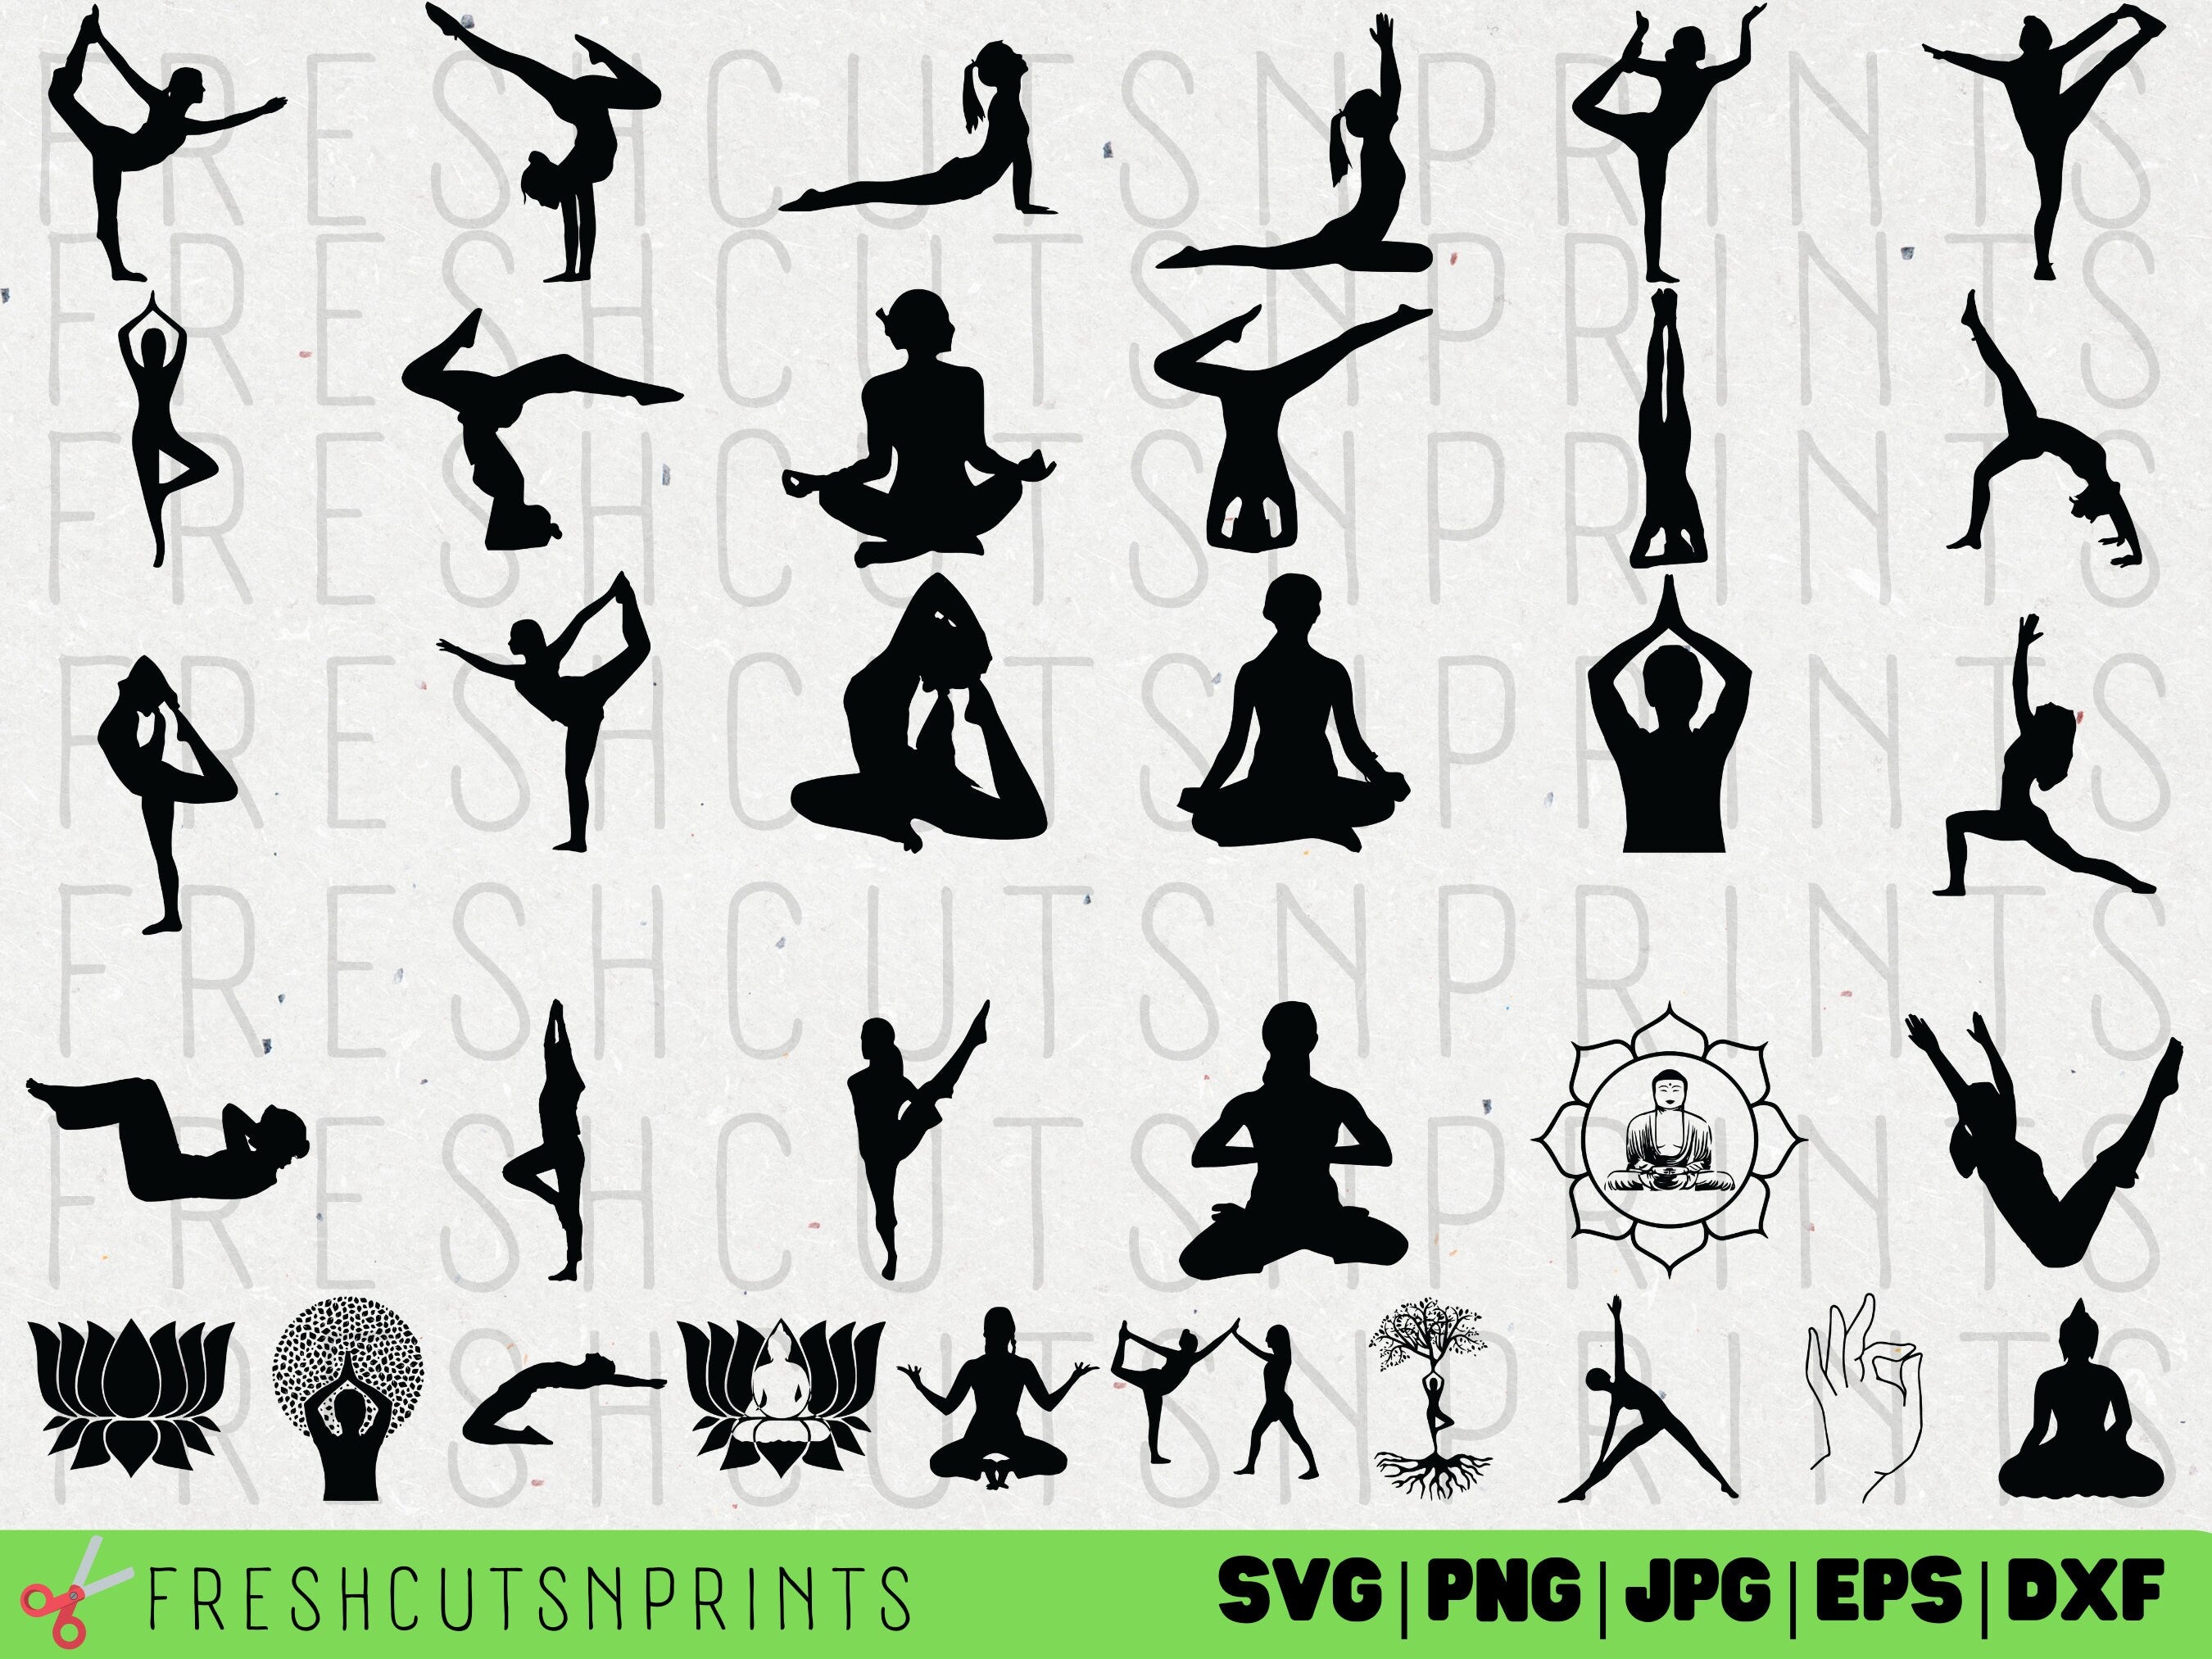 Best Woman in yoga pose Illustration download in PNG & Vector format